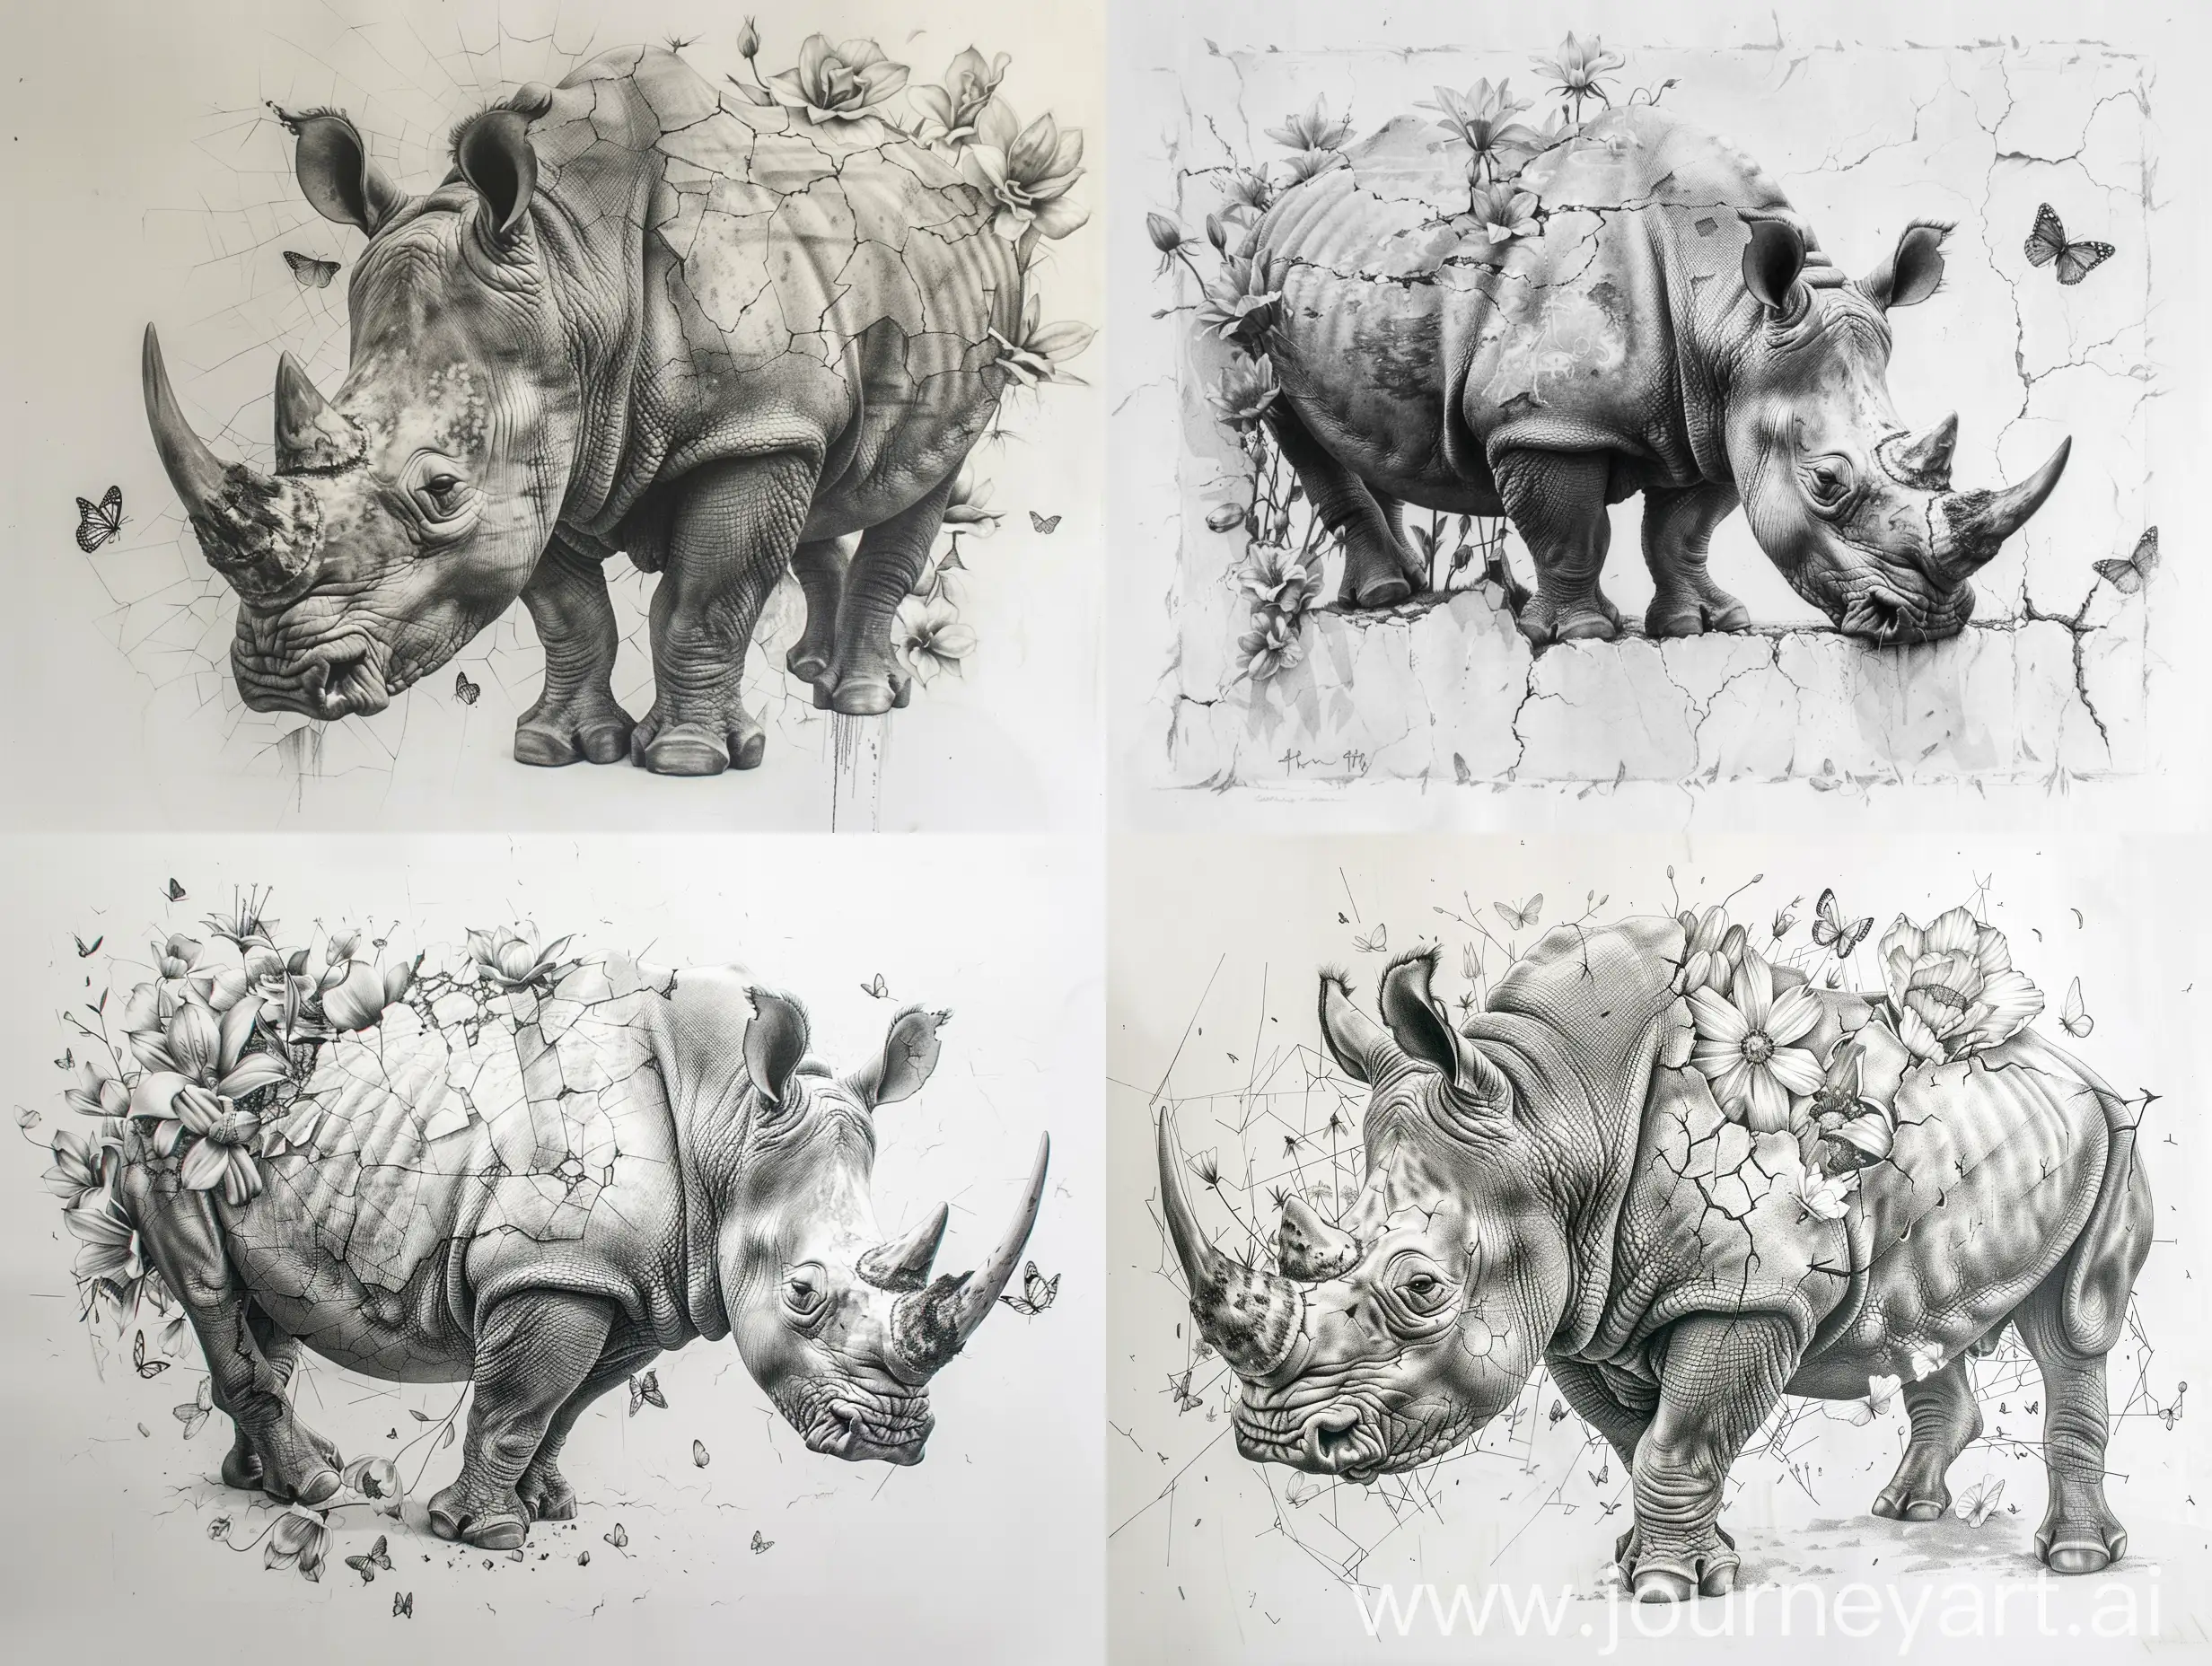 Hyper-Realistic-Rhino-Pencil-Sketch-Rhino-with-Cracked-Surface-and-Blooming-Flowers